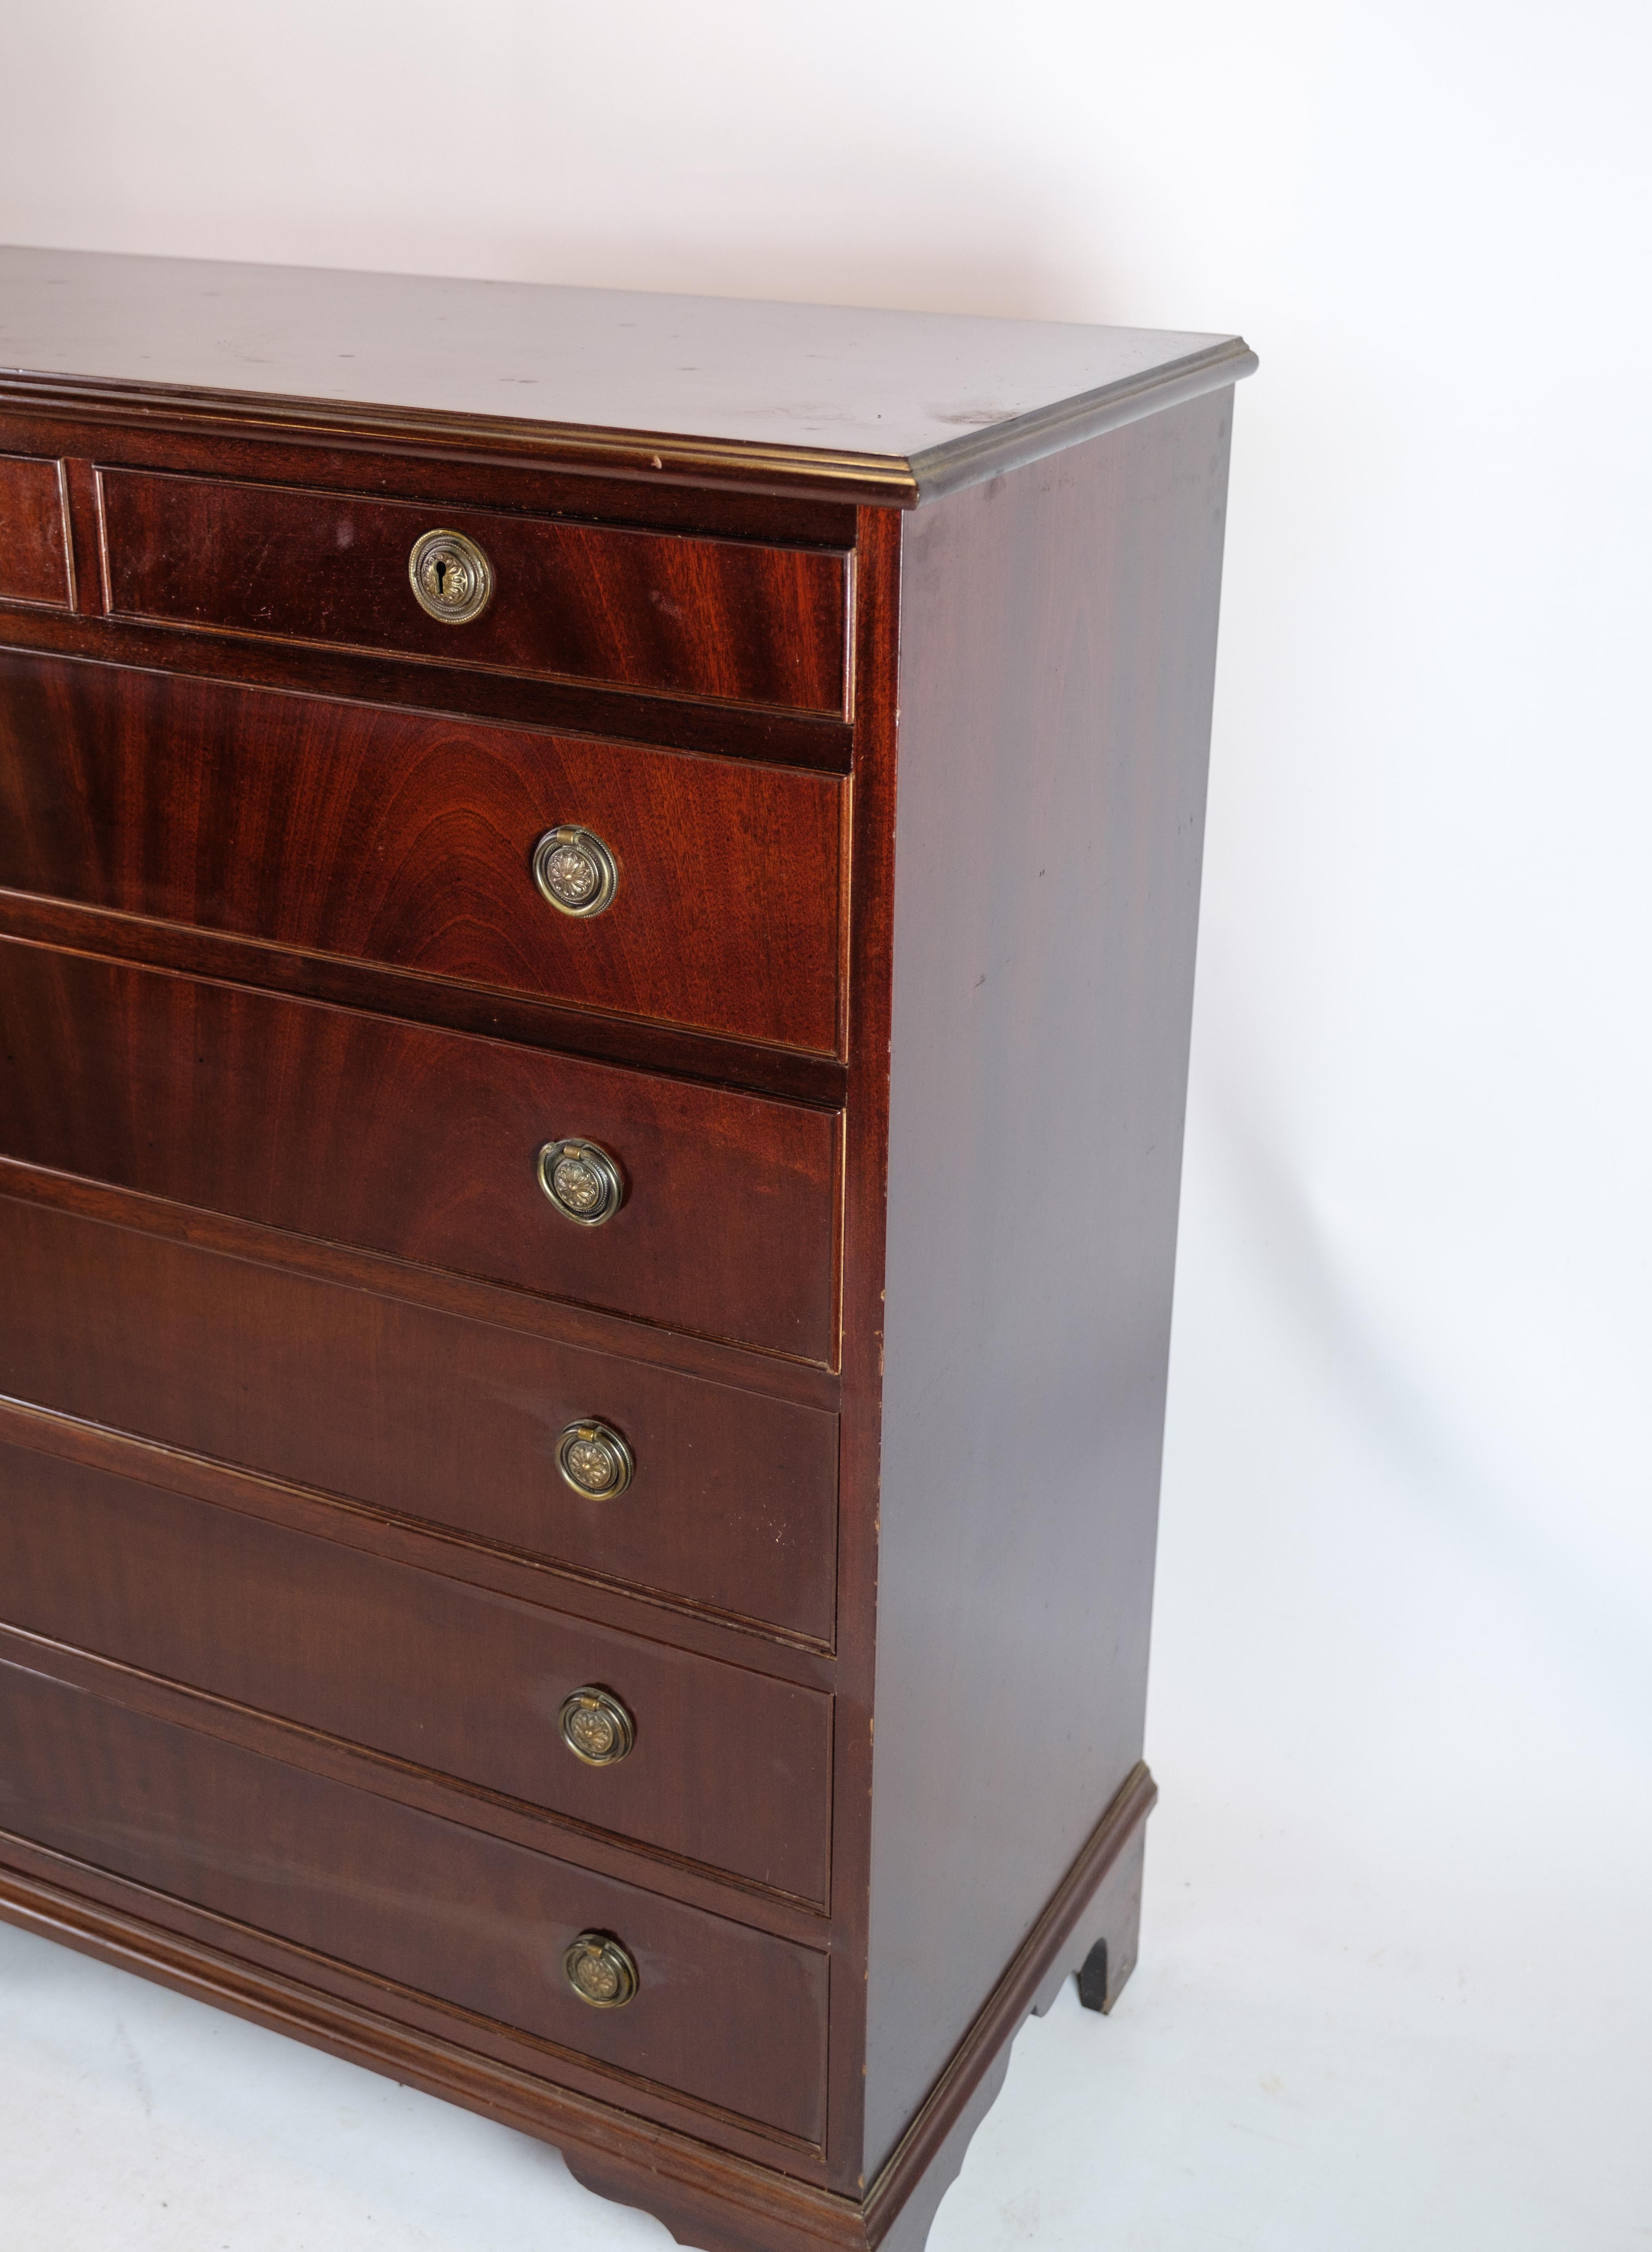 Danish Chest of drawers In Mahogany With 7 drawers and Brass handles From The 1930